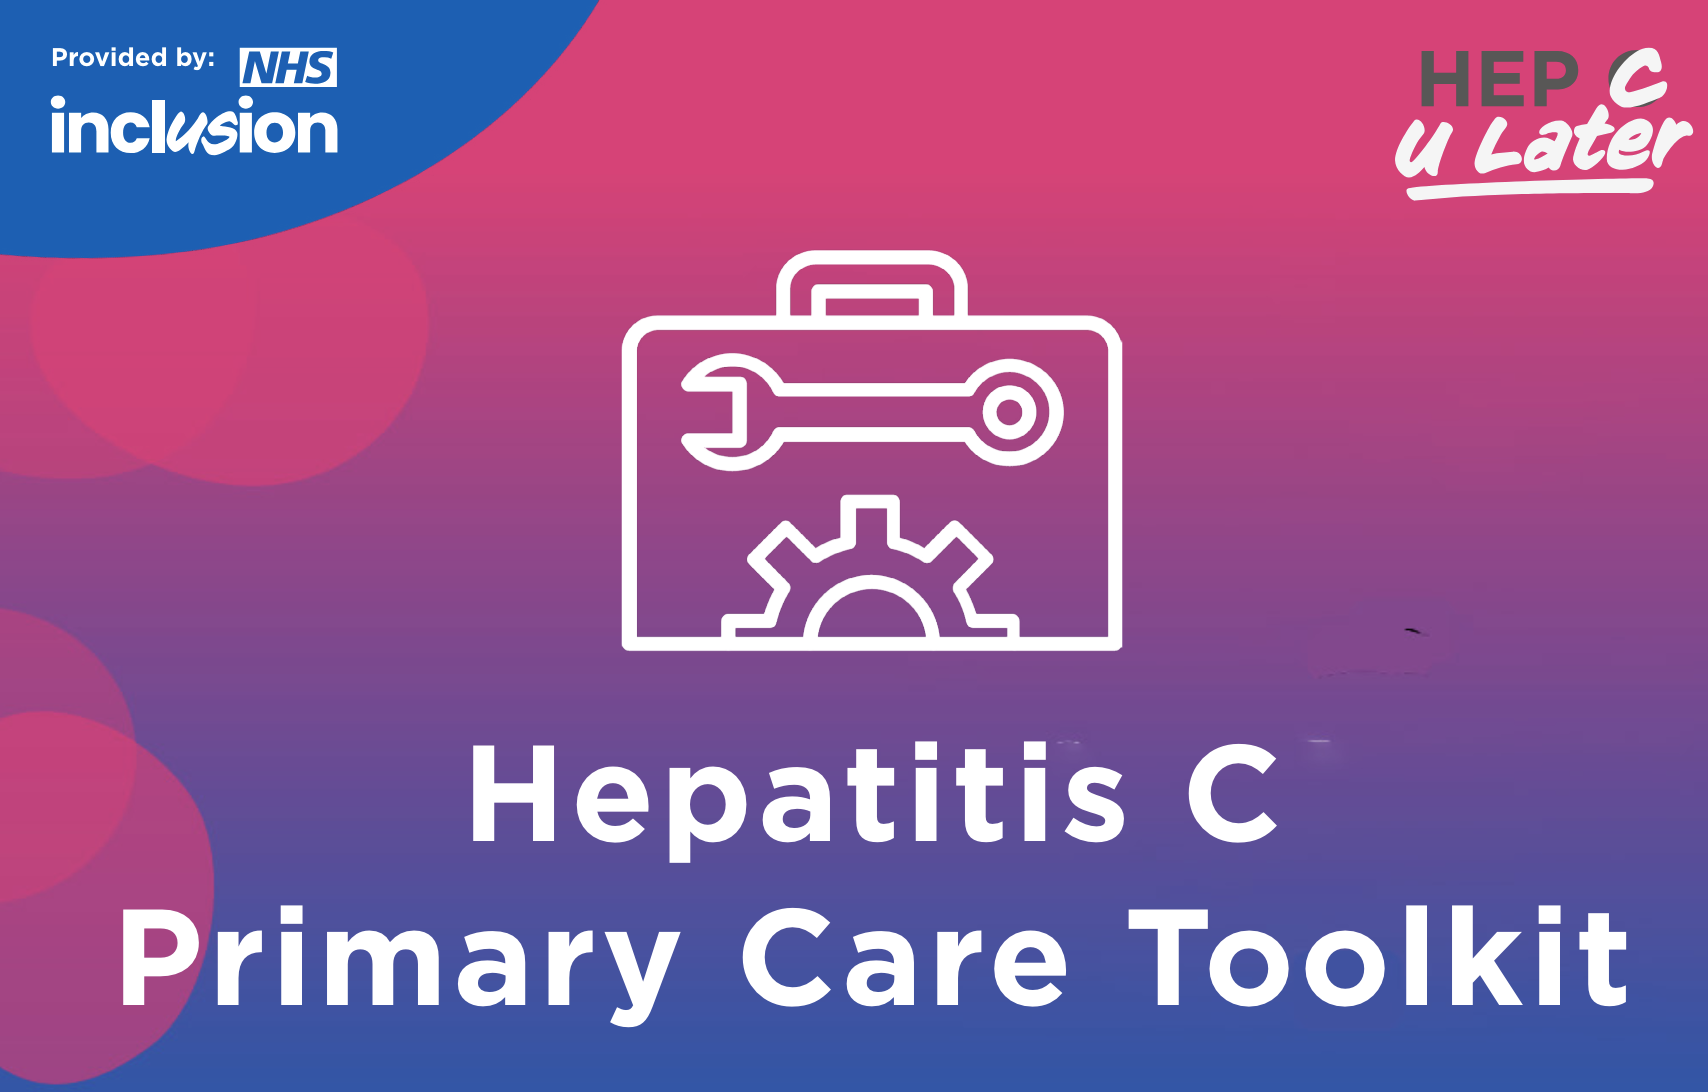 Primary Care Toolkit featured image